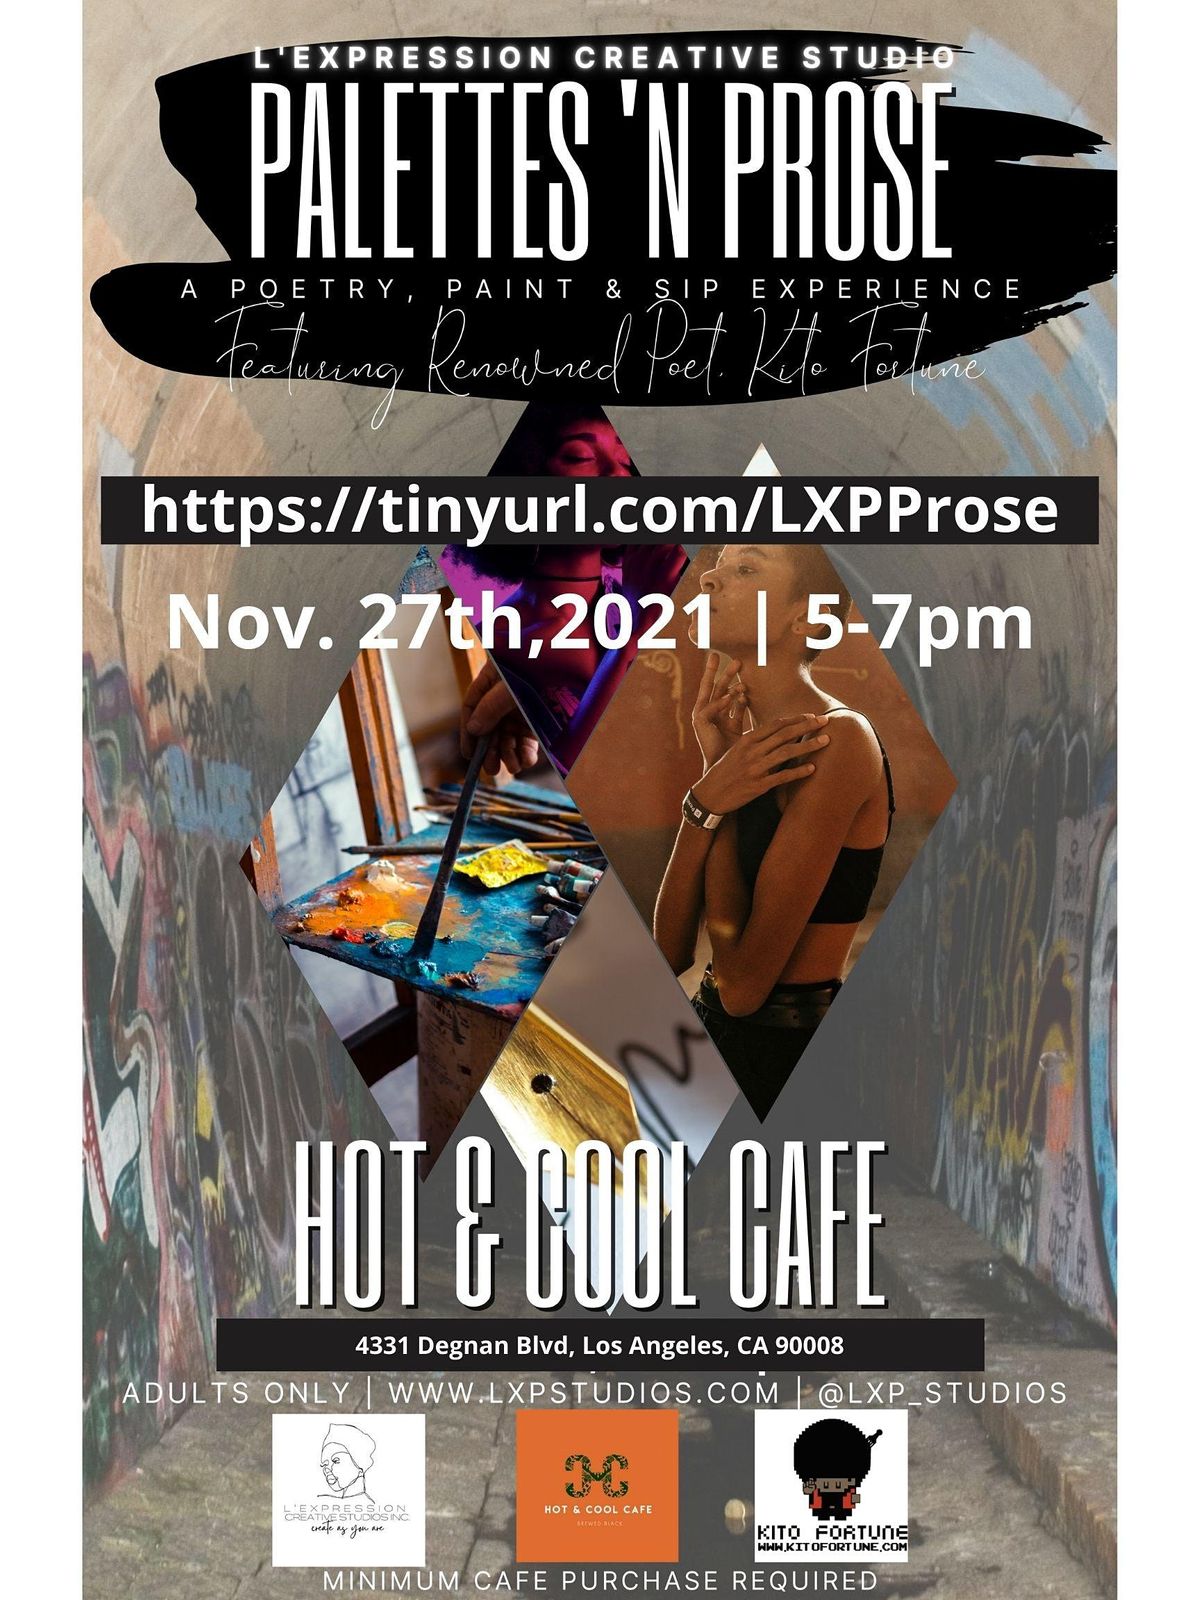 Palettes 'N Prose-A Poetry, Paint & Sip Experience featuring Kito Fortune